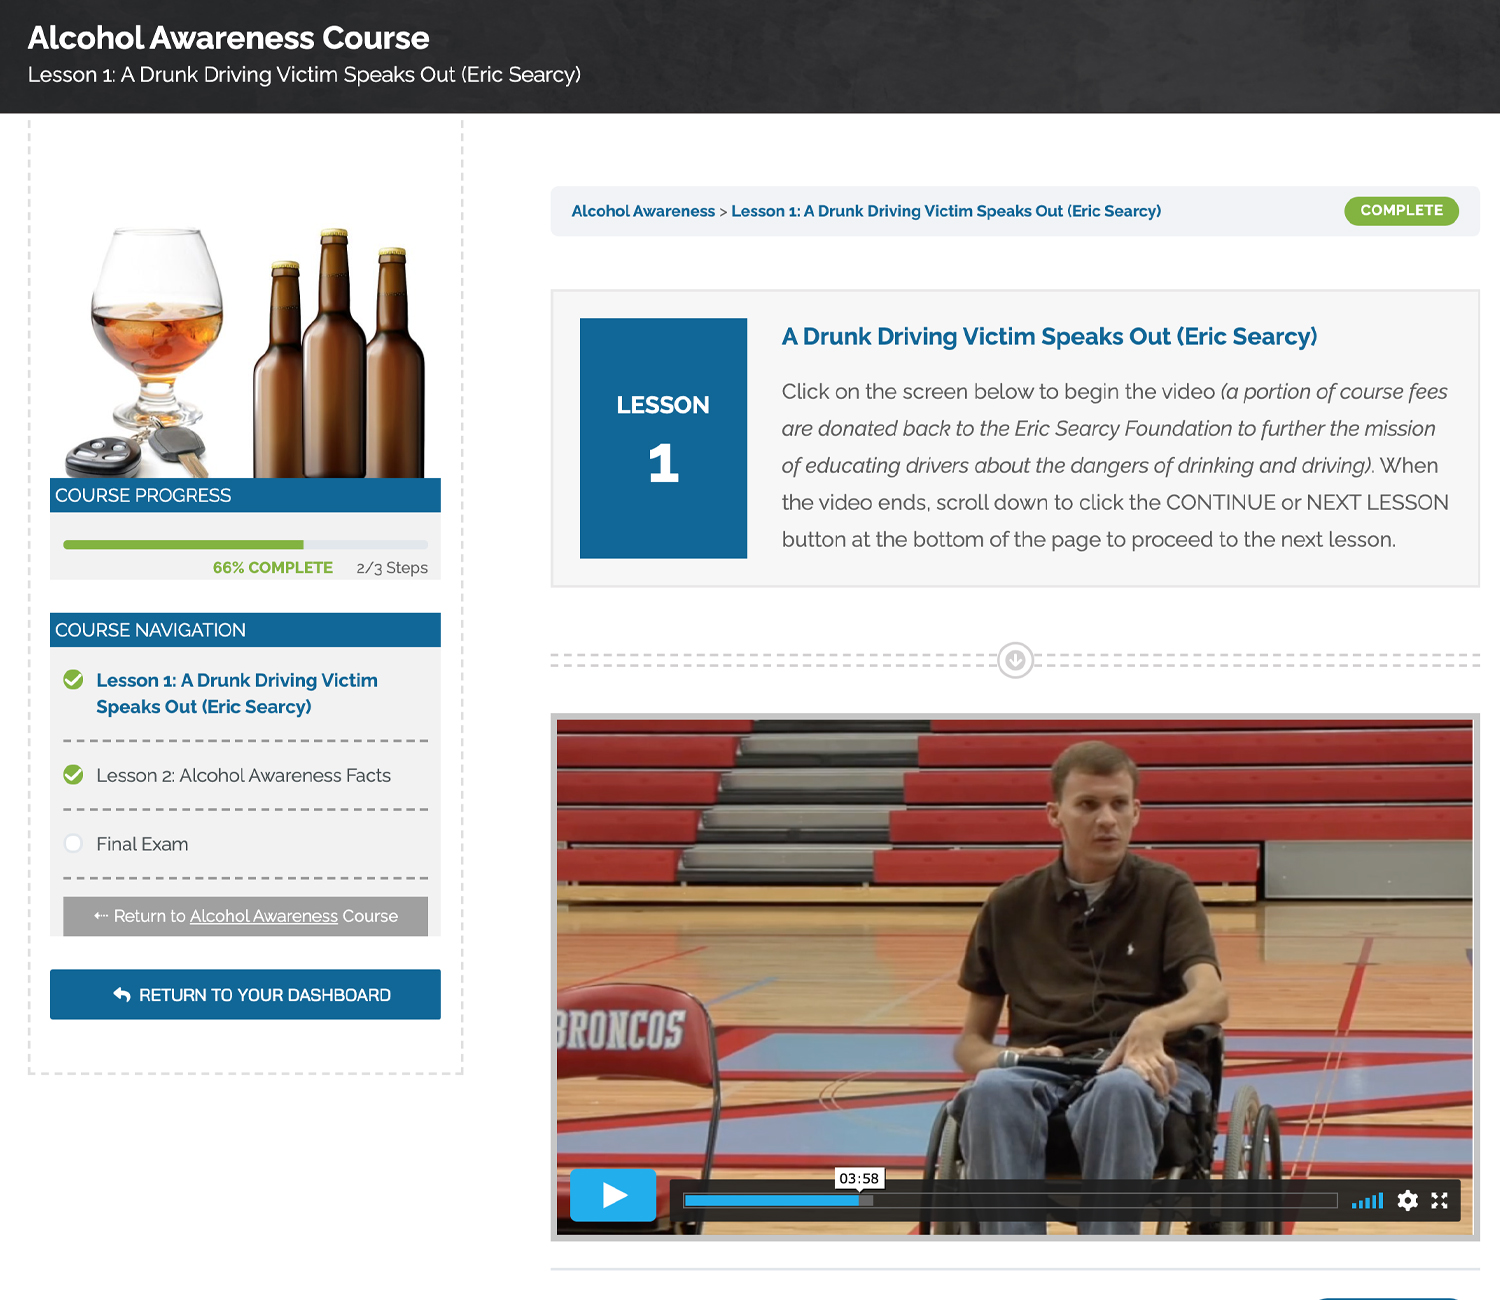 Alcohol Awareness Course Video (Eric Searcy)